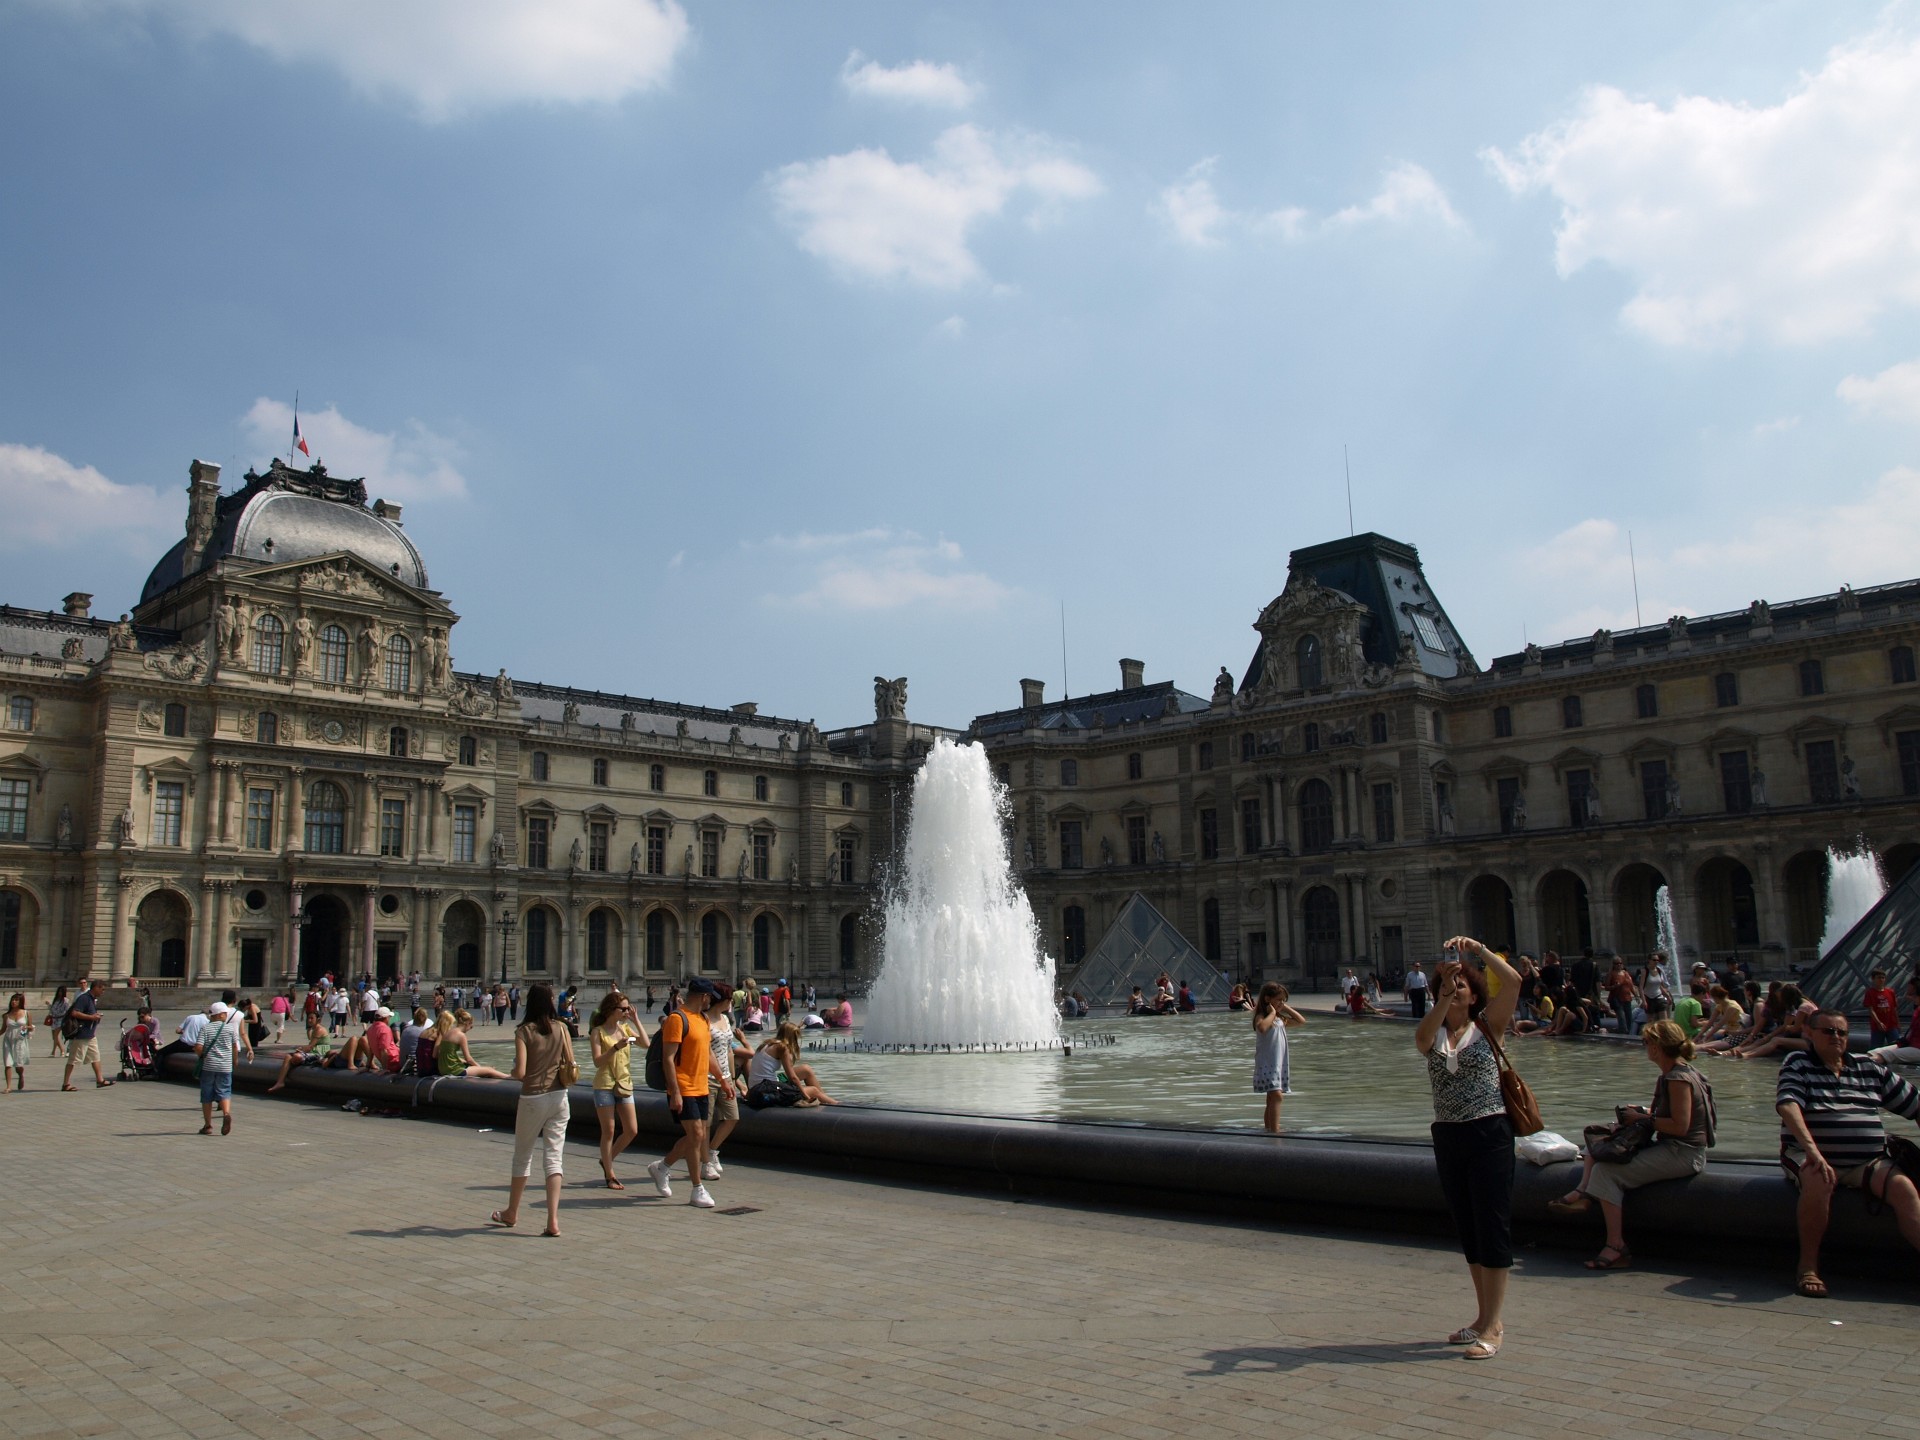 Fountain in the Louvre Courtyard